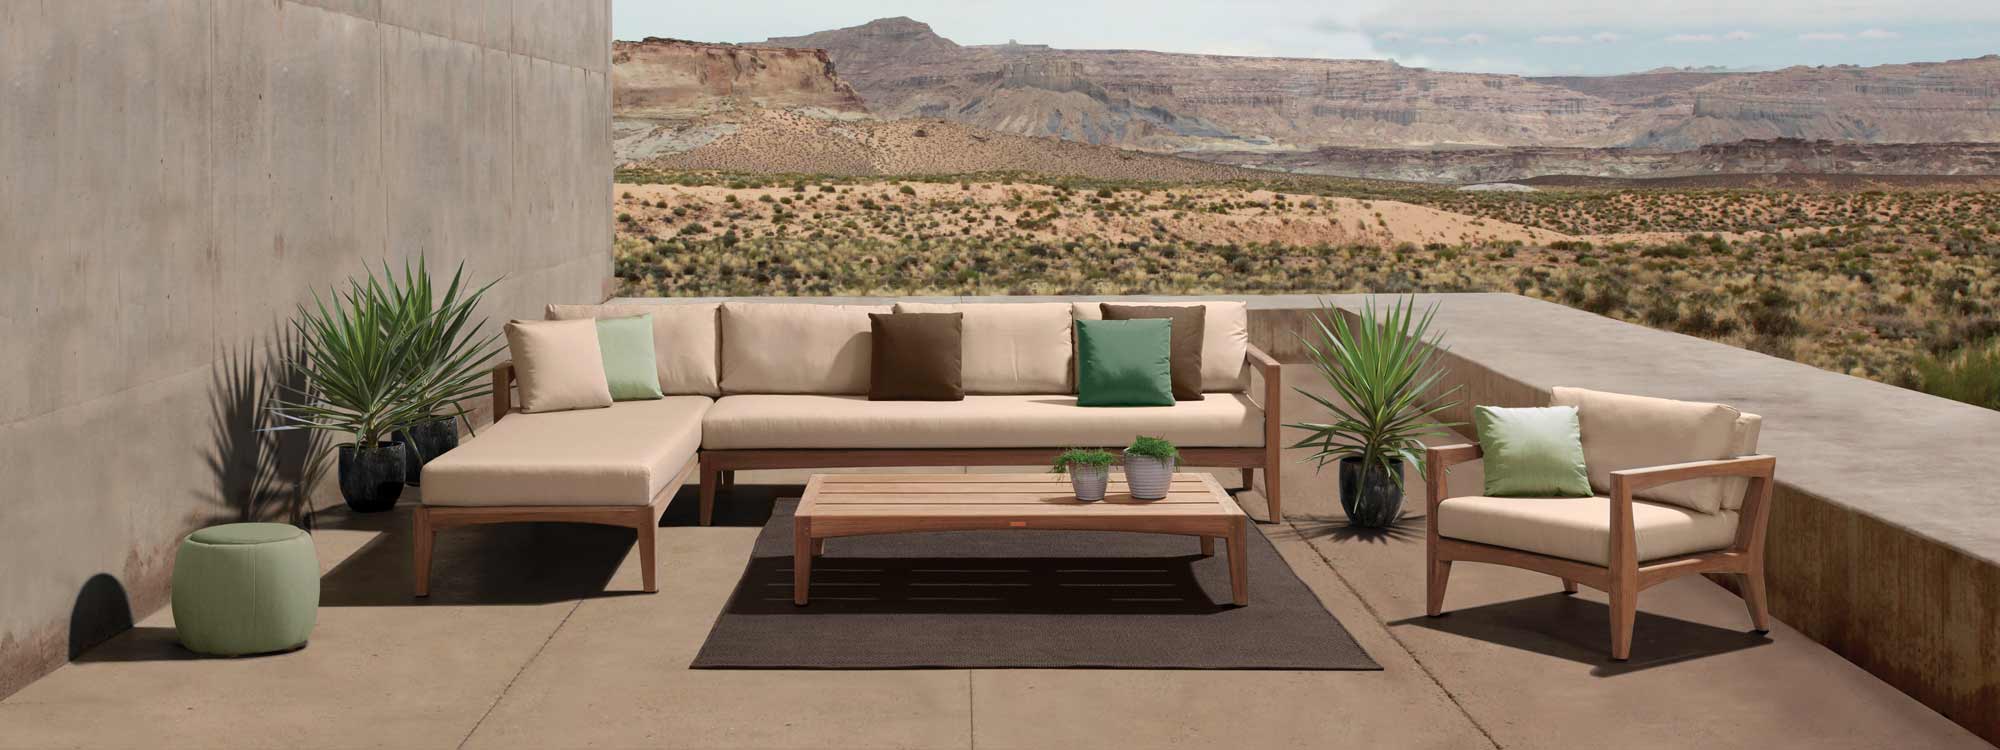 Image of Zenhit Lounge with Ecru cushions by Royal Botania with parched landscape in background